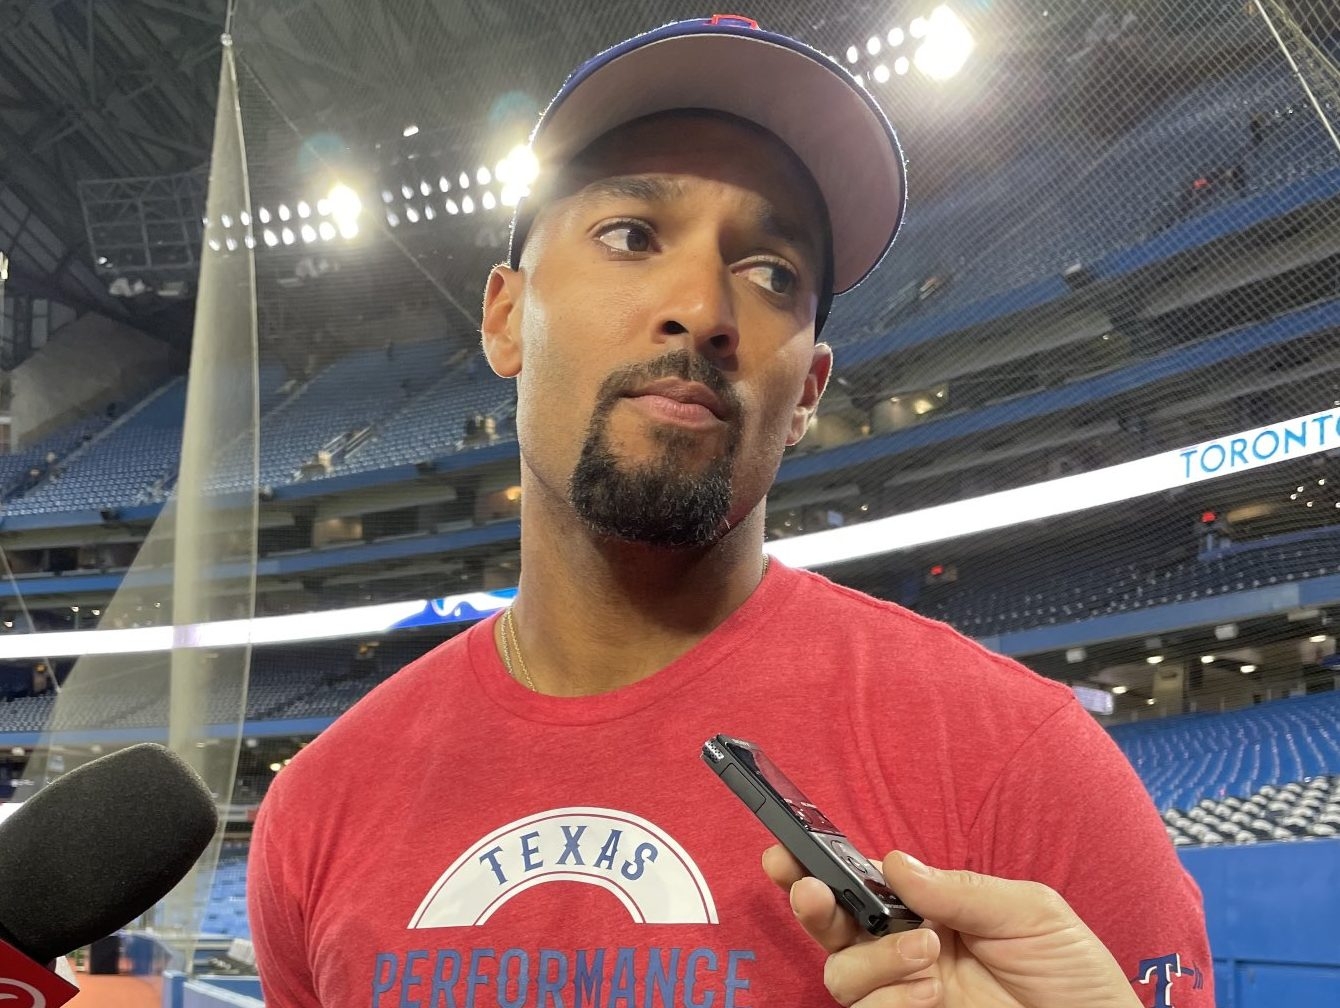 WHOLESOME EXPERIENCE': Marcus Semien has fond memories of Blue Jays